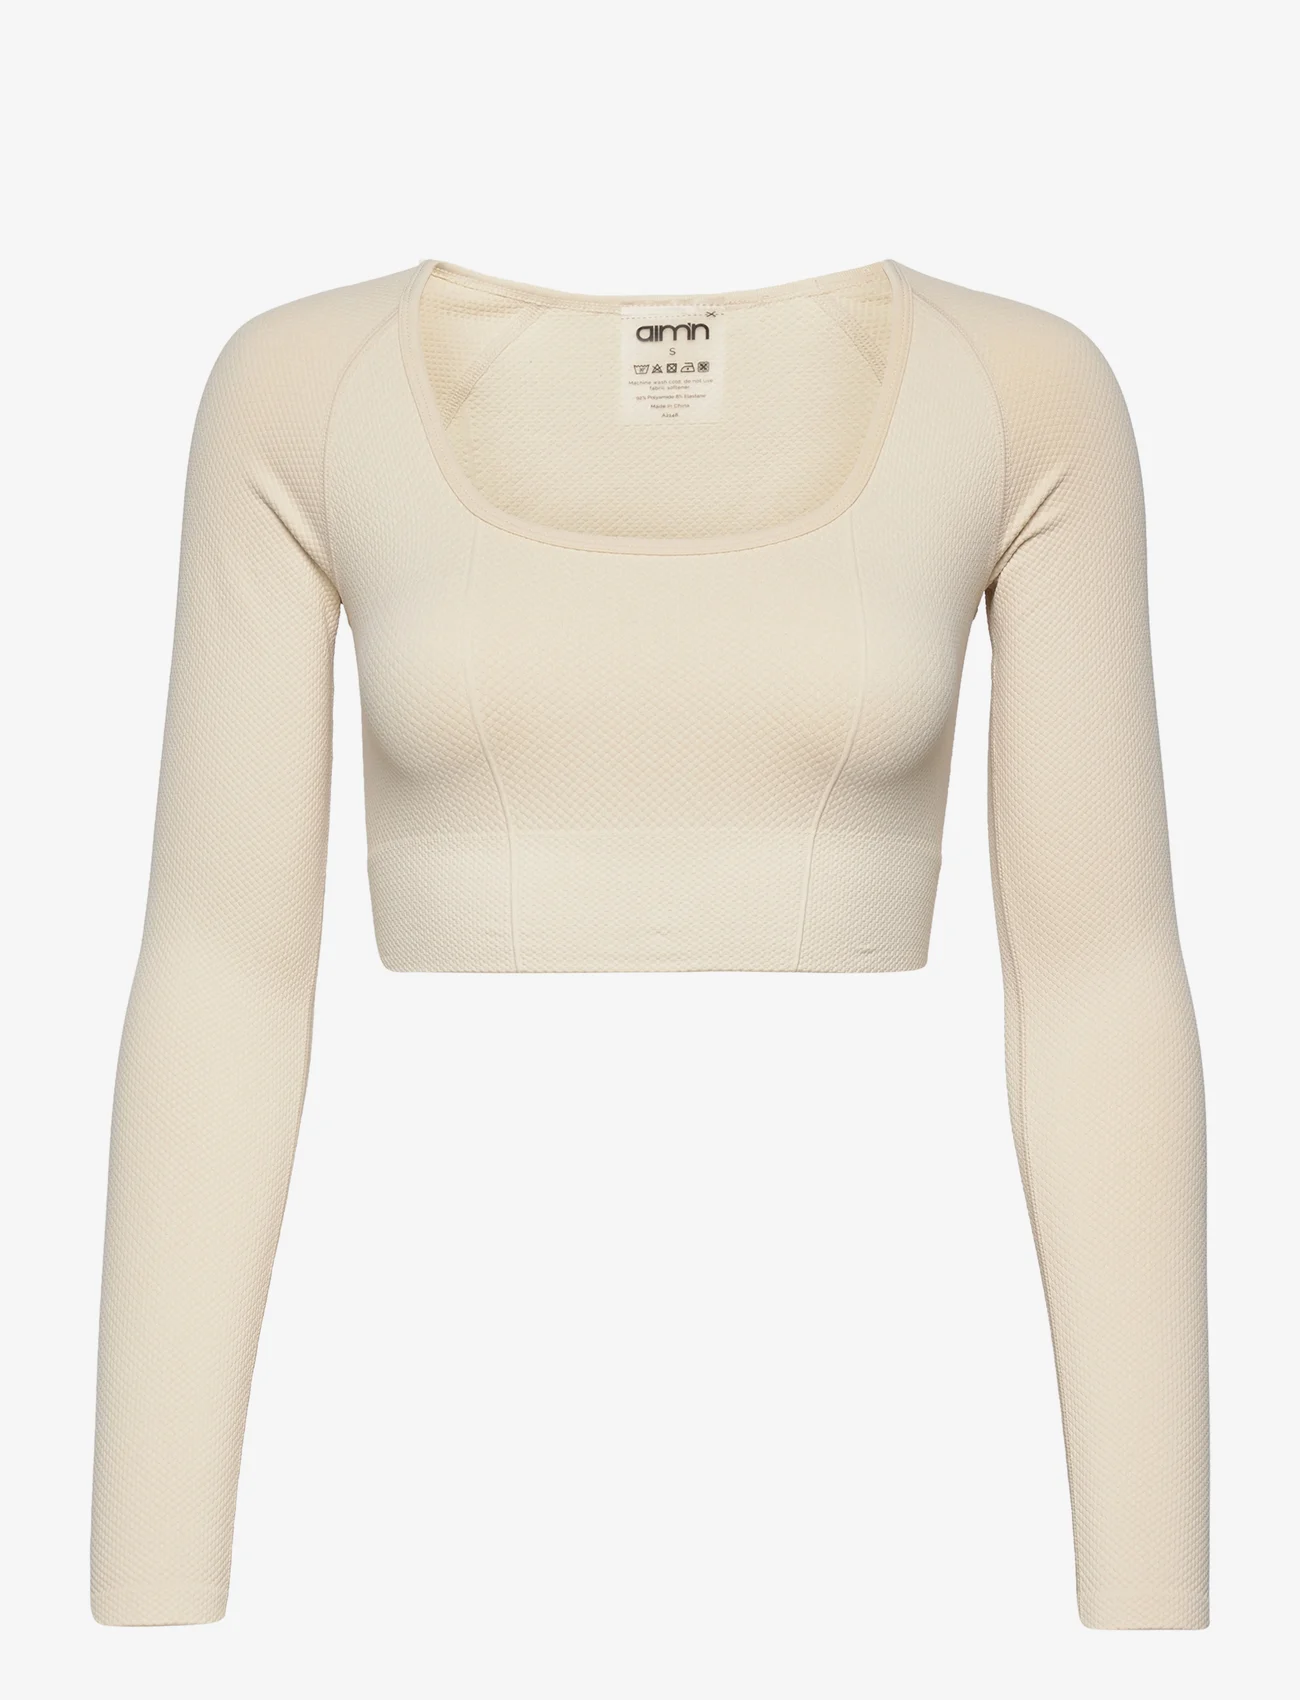 AIM'N - Luxe Seamless Cropped Long Sleeve - laveste priser - oat white - 0